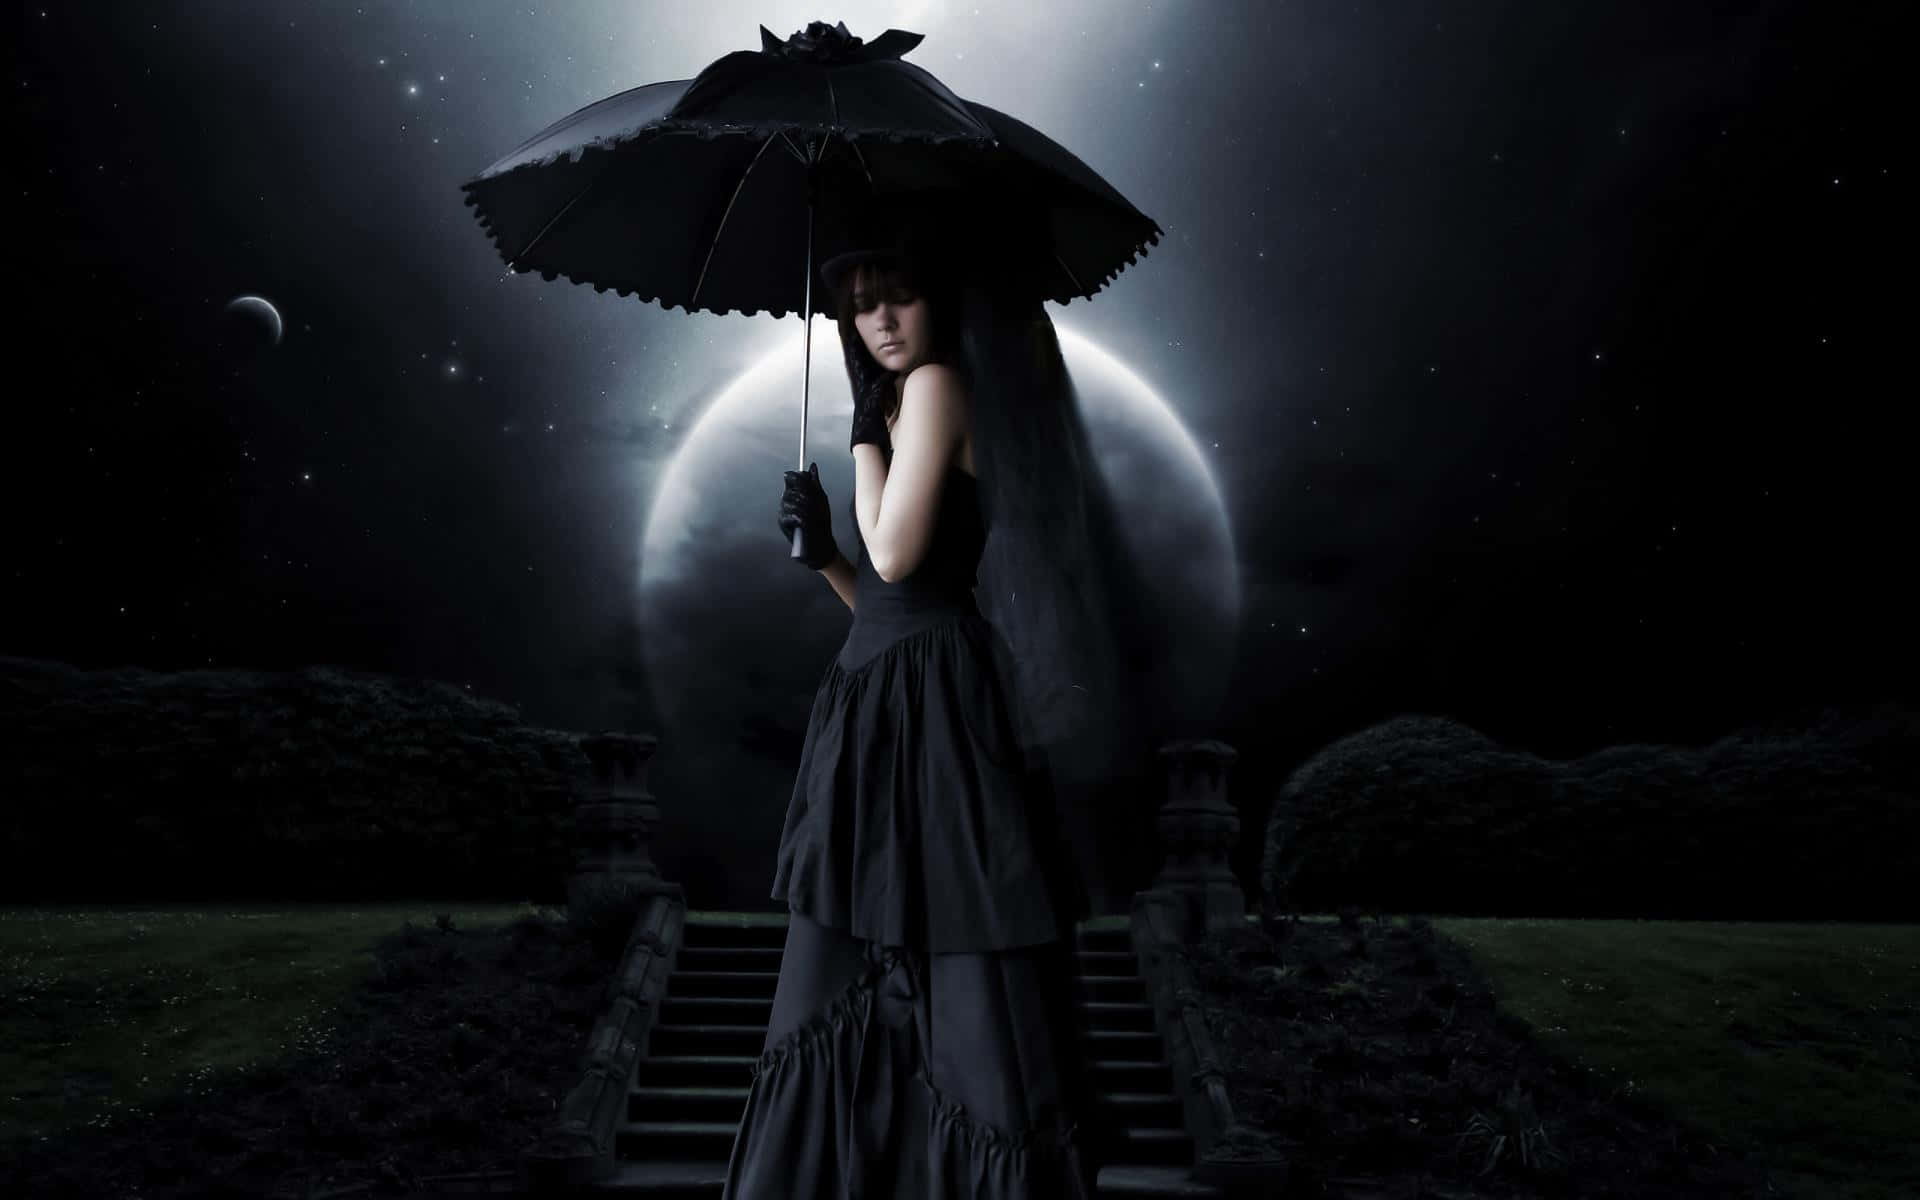 Gothic Computer Goth Girl With Umbrella Wallpaper